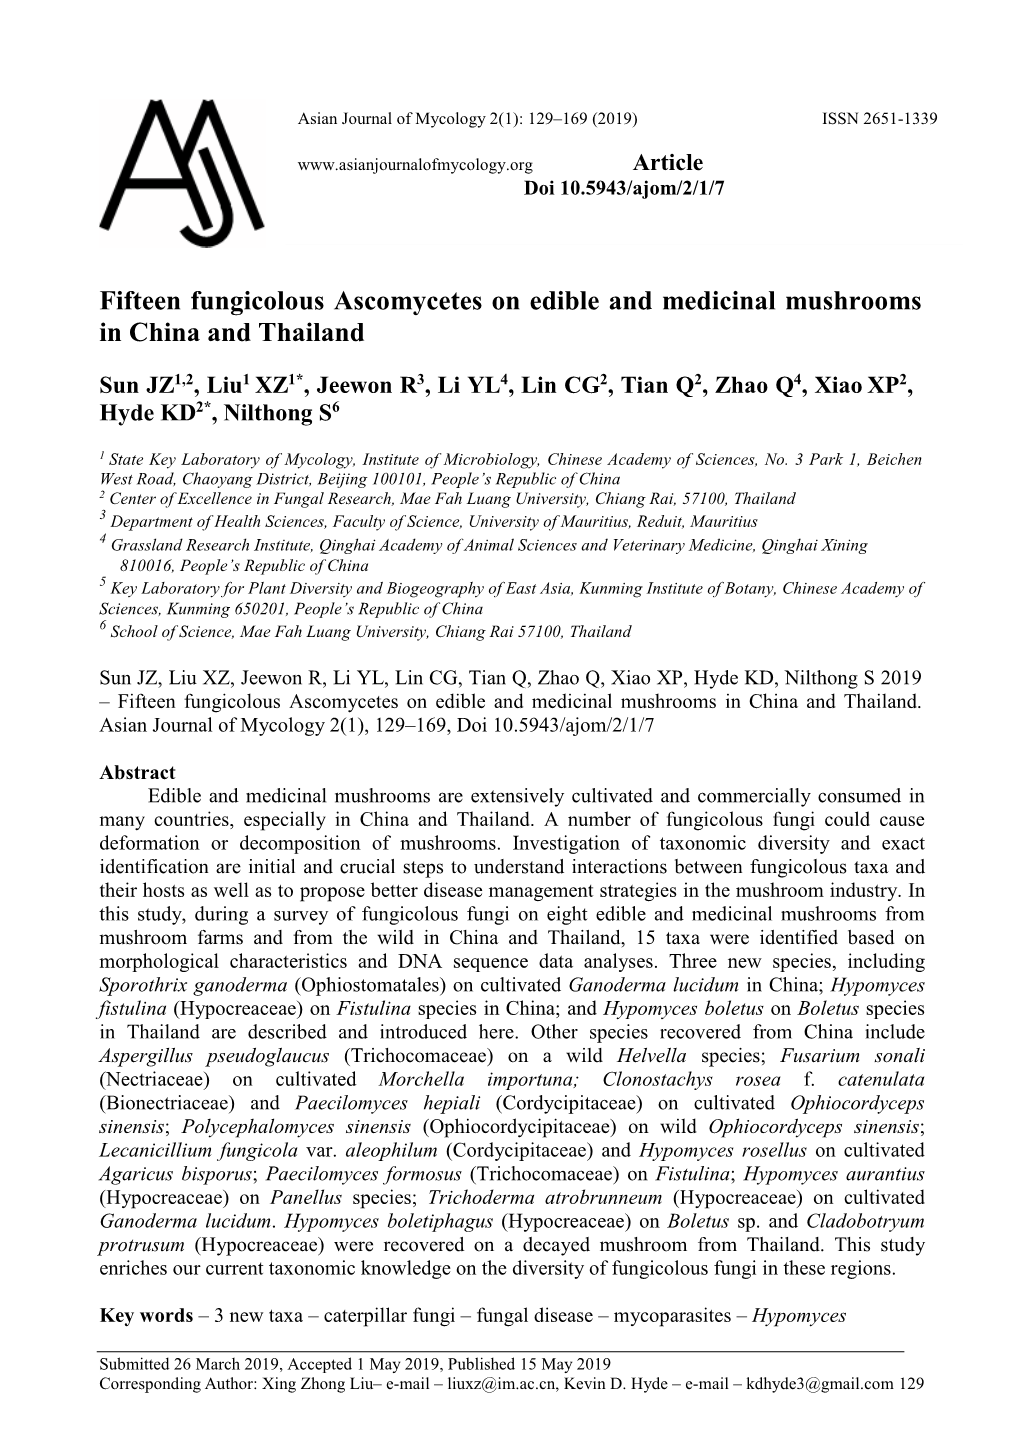 Fifteen Fungicolous Ascomycetes on Edible and Medicinal Mushrooms in China and Thailand